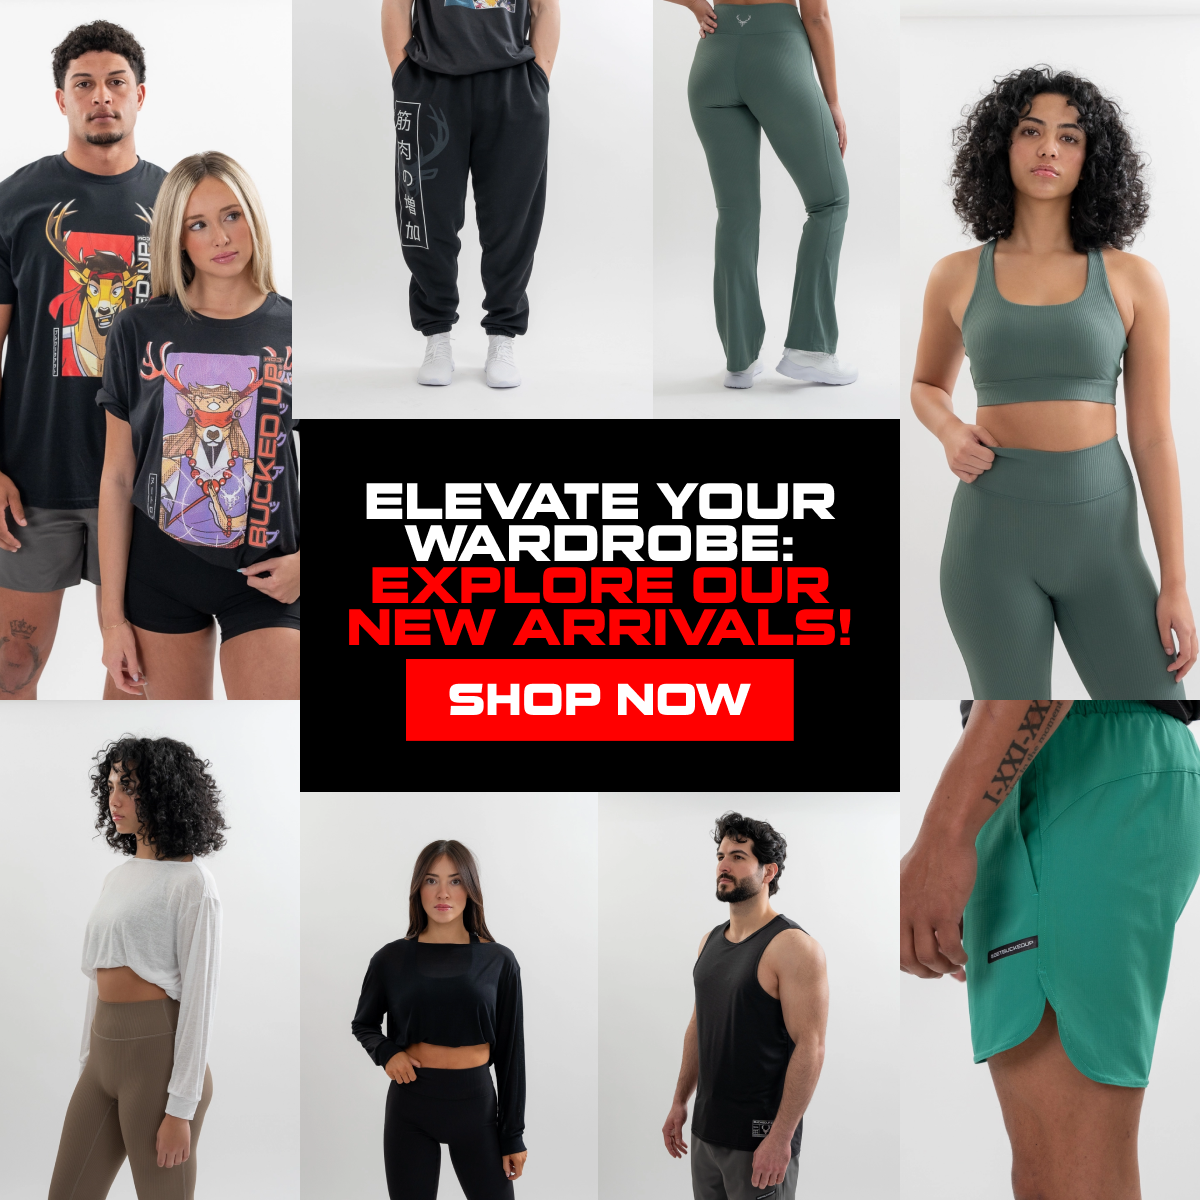 3.26.2024 Apparel Drop - Text says "Elevate your wardrobe: explore our new arrivals!", Button says "shop now", and image displays varying images of models wearing 8 different articles of clothing such as the anime t-shirt, liner shorts